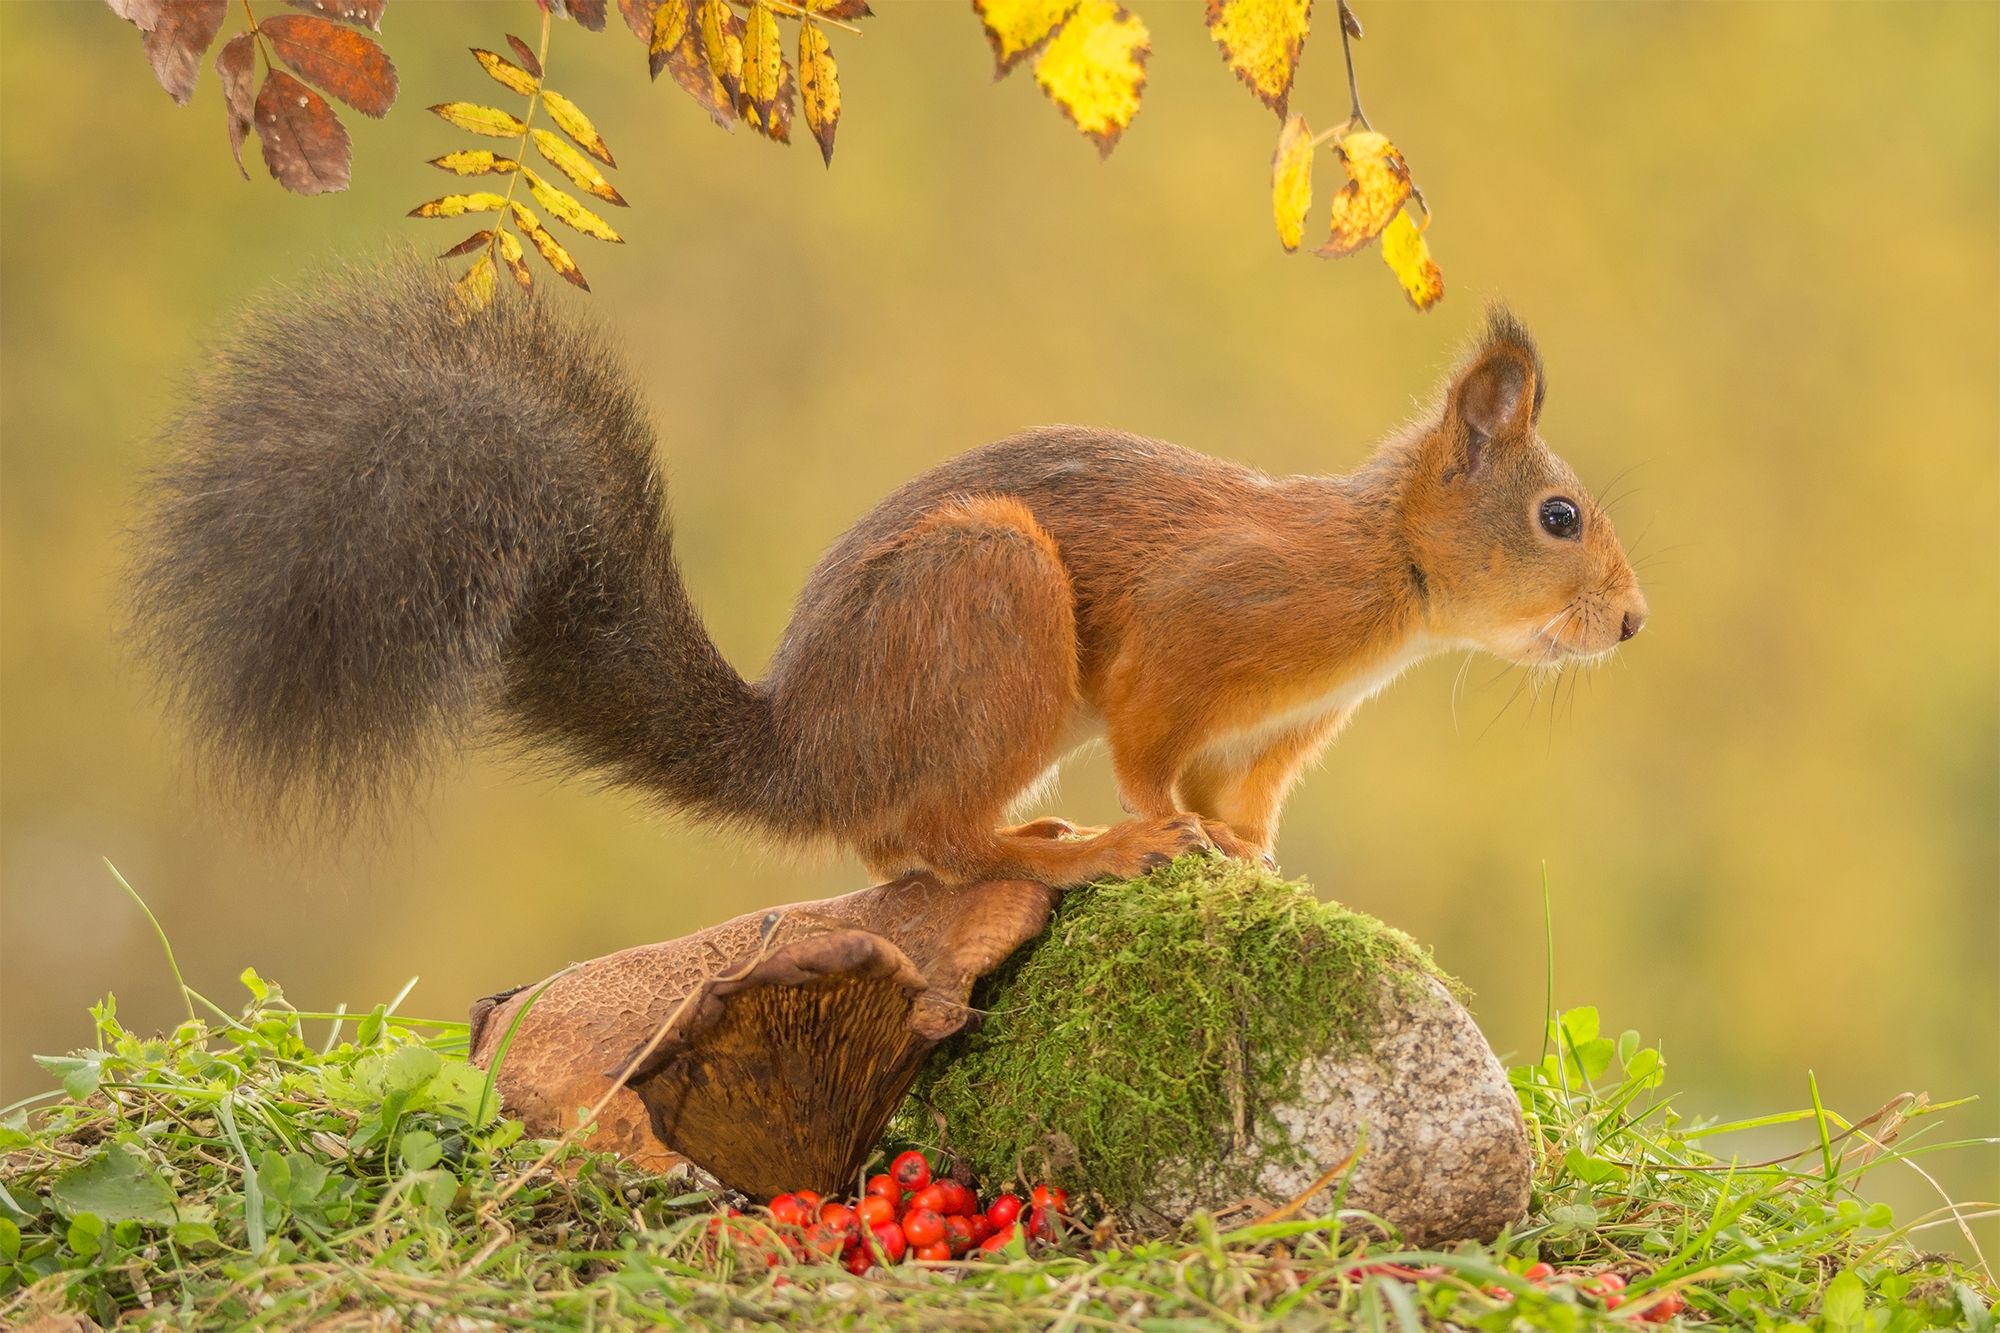 Autumn Landscape With Squirrel Wallpaper Quality Image And Transparent PNG Free Clipart